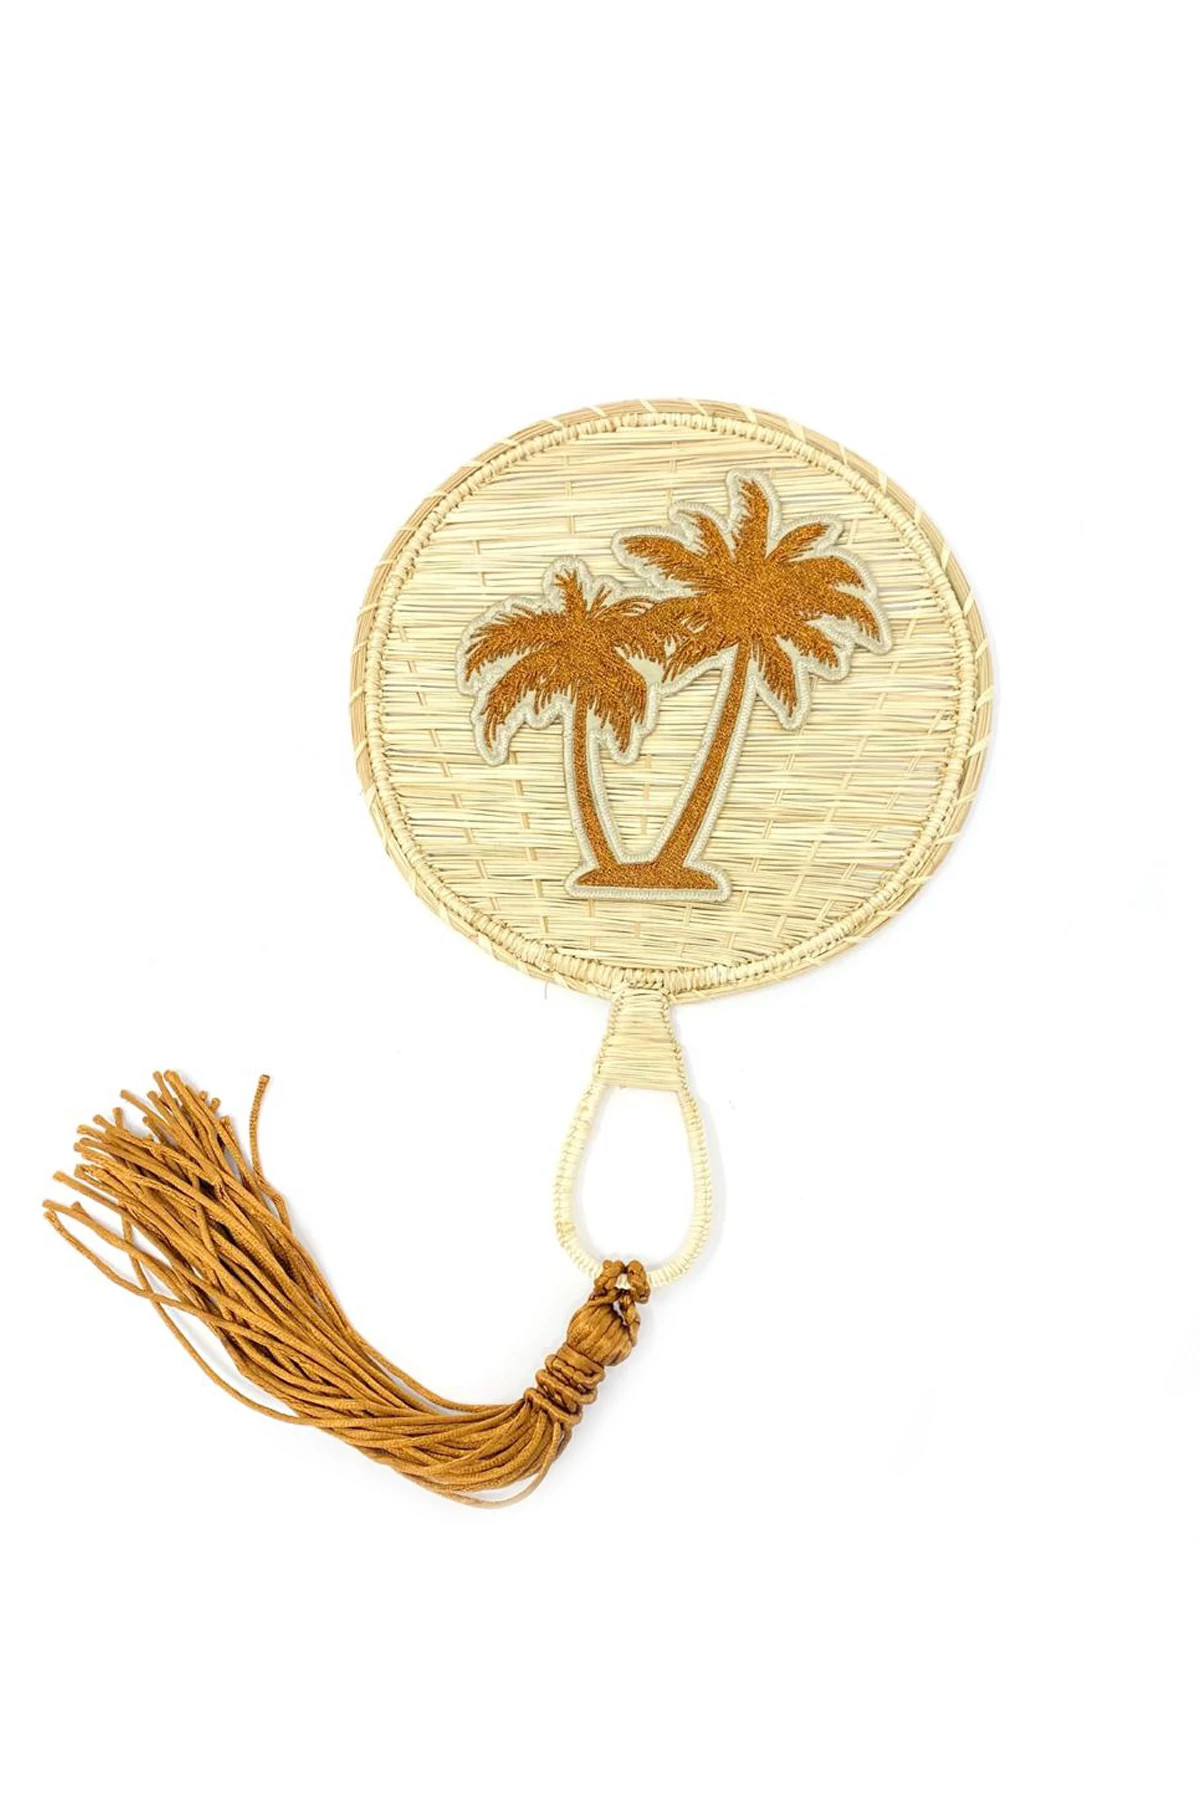 GOLD Embroidered Palm Beach Appliqué Straw Fan image number 1